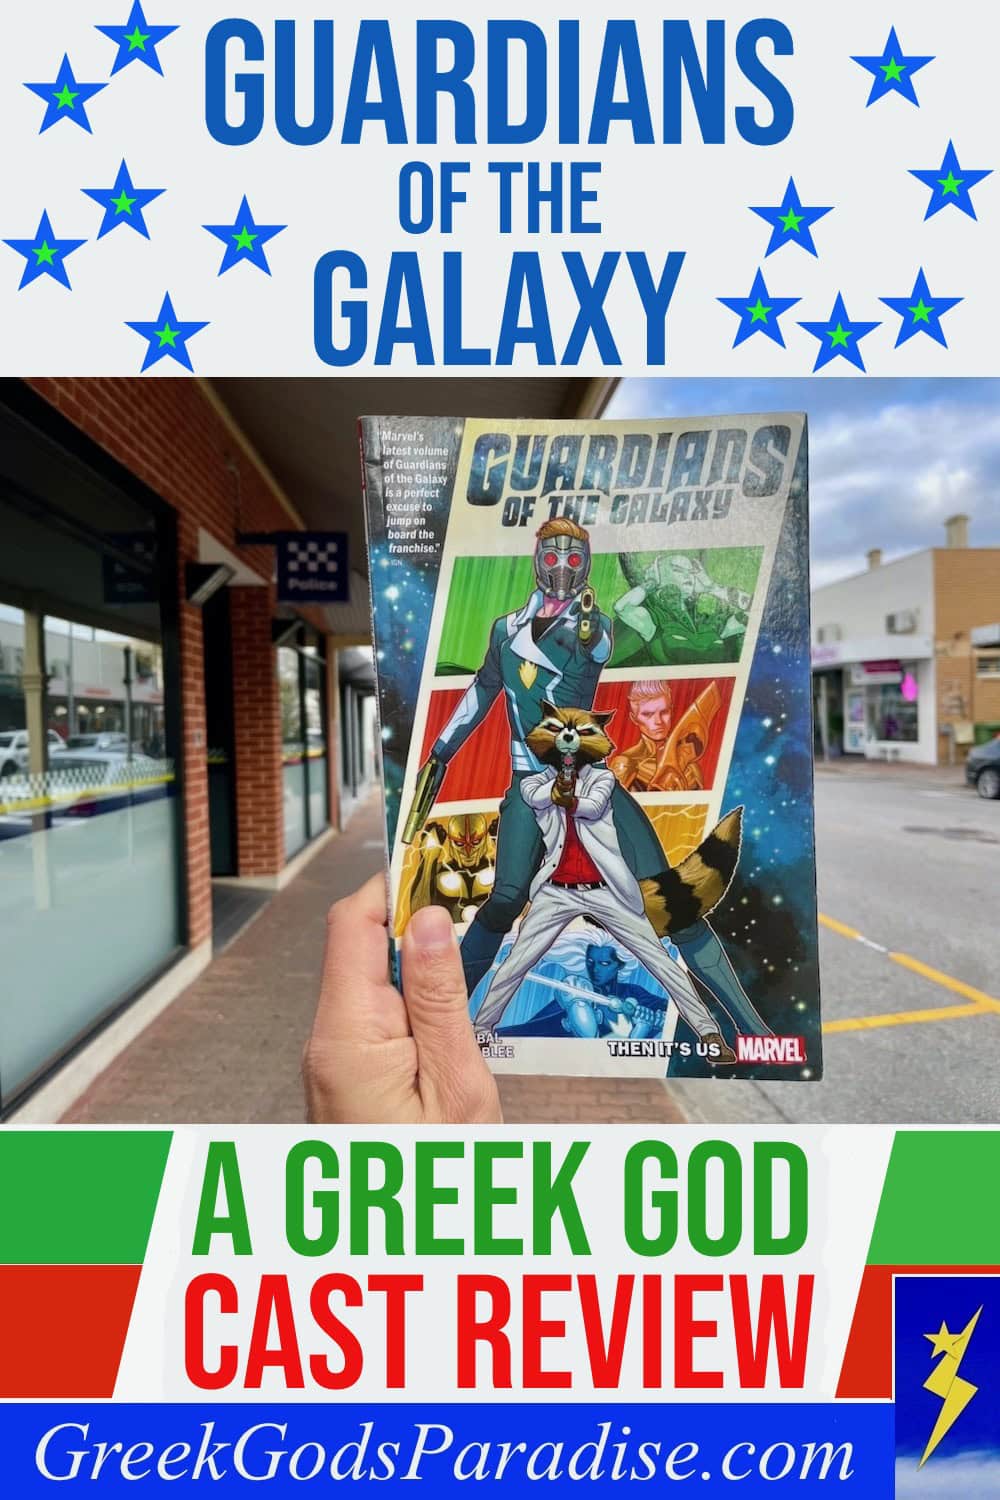 Guardians of the Galaxy A Greek God Cast Review